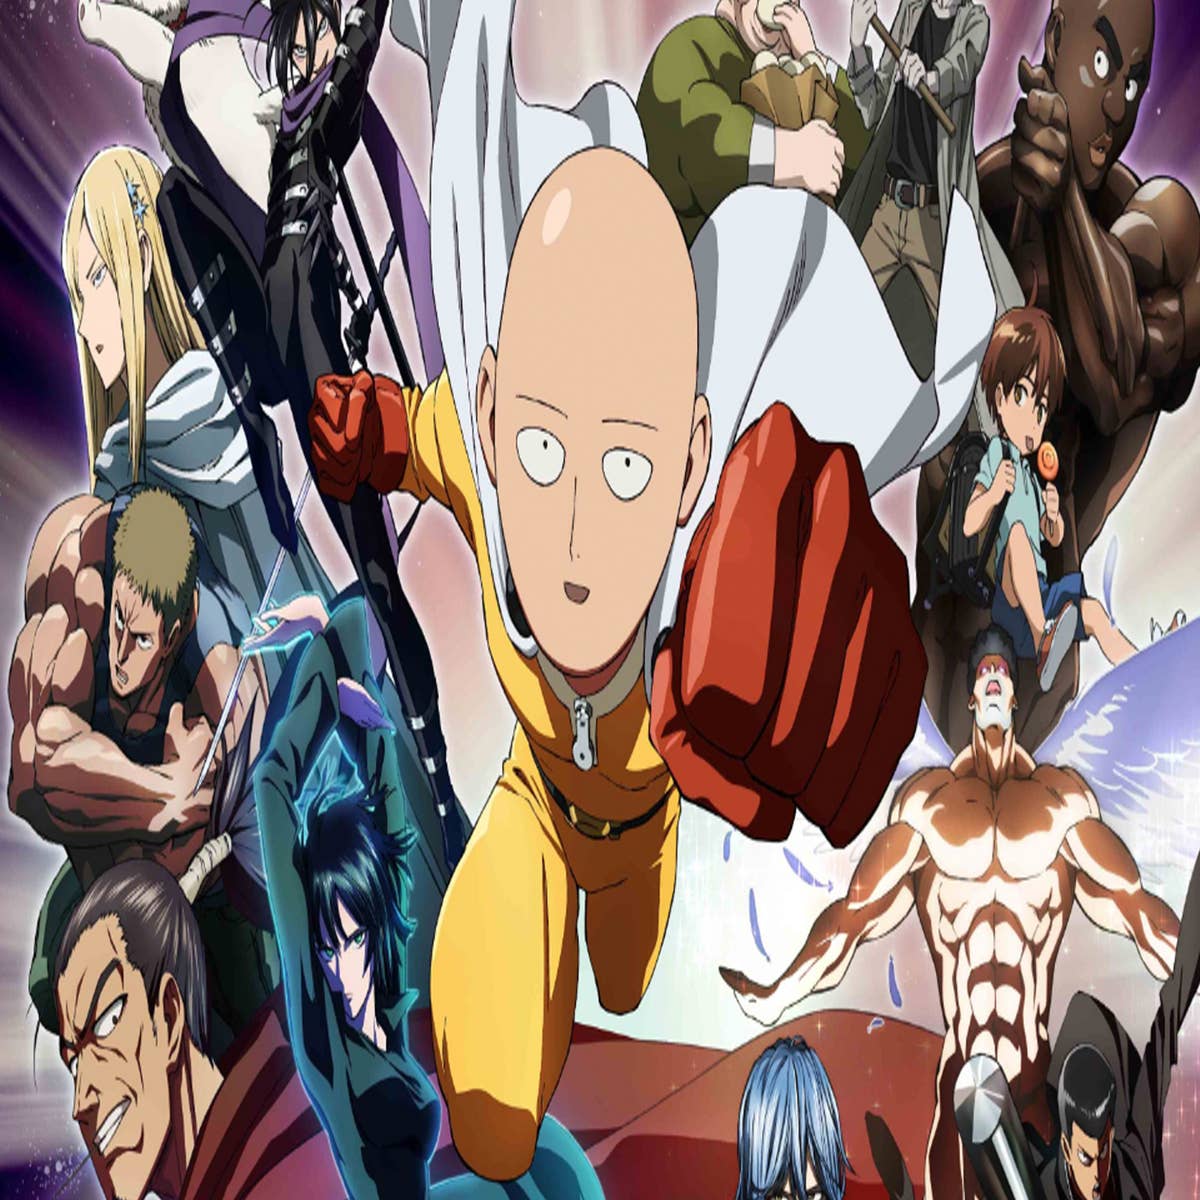 Season 3 of OPM will be animated by MAPPA?